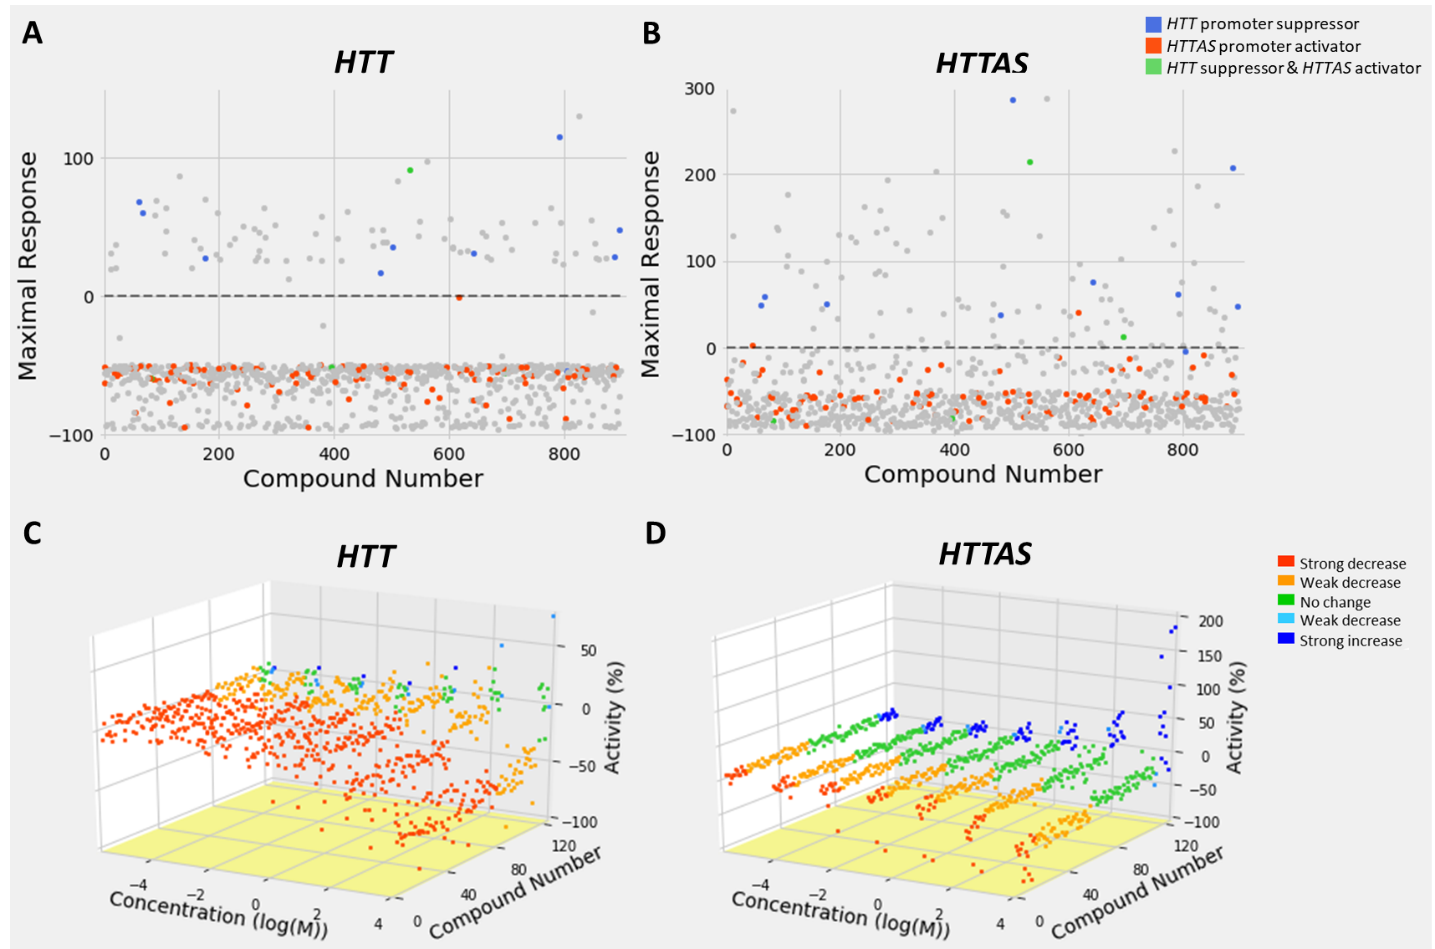 Small compound effect on HTT and HTTAS promoter activity